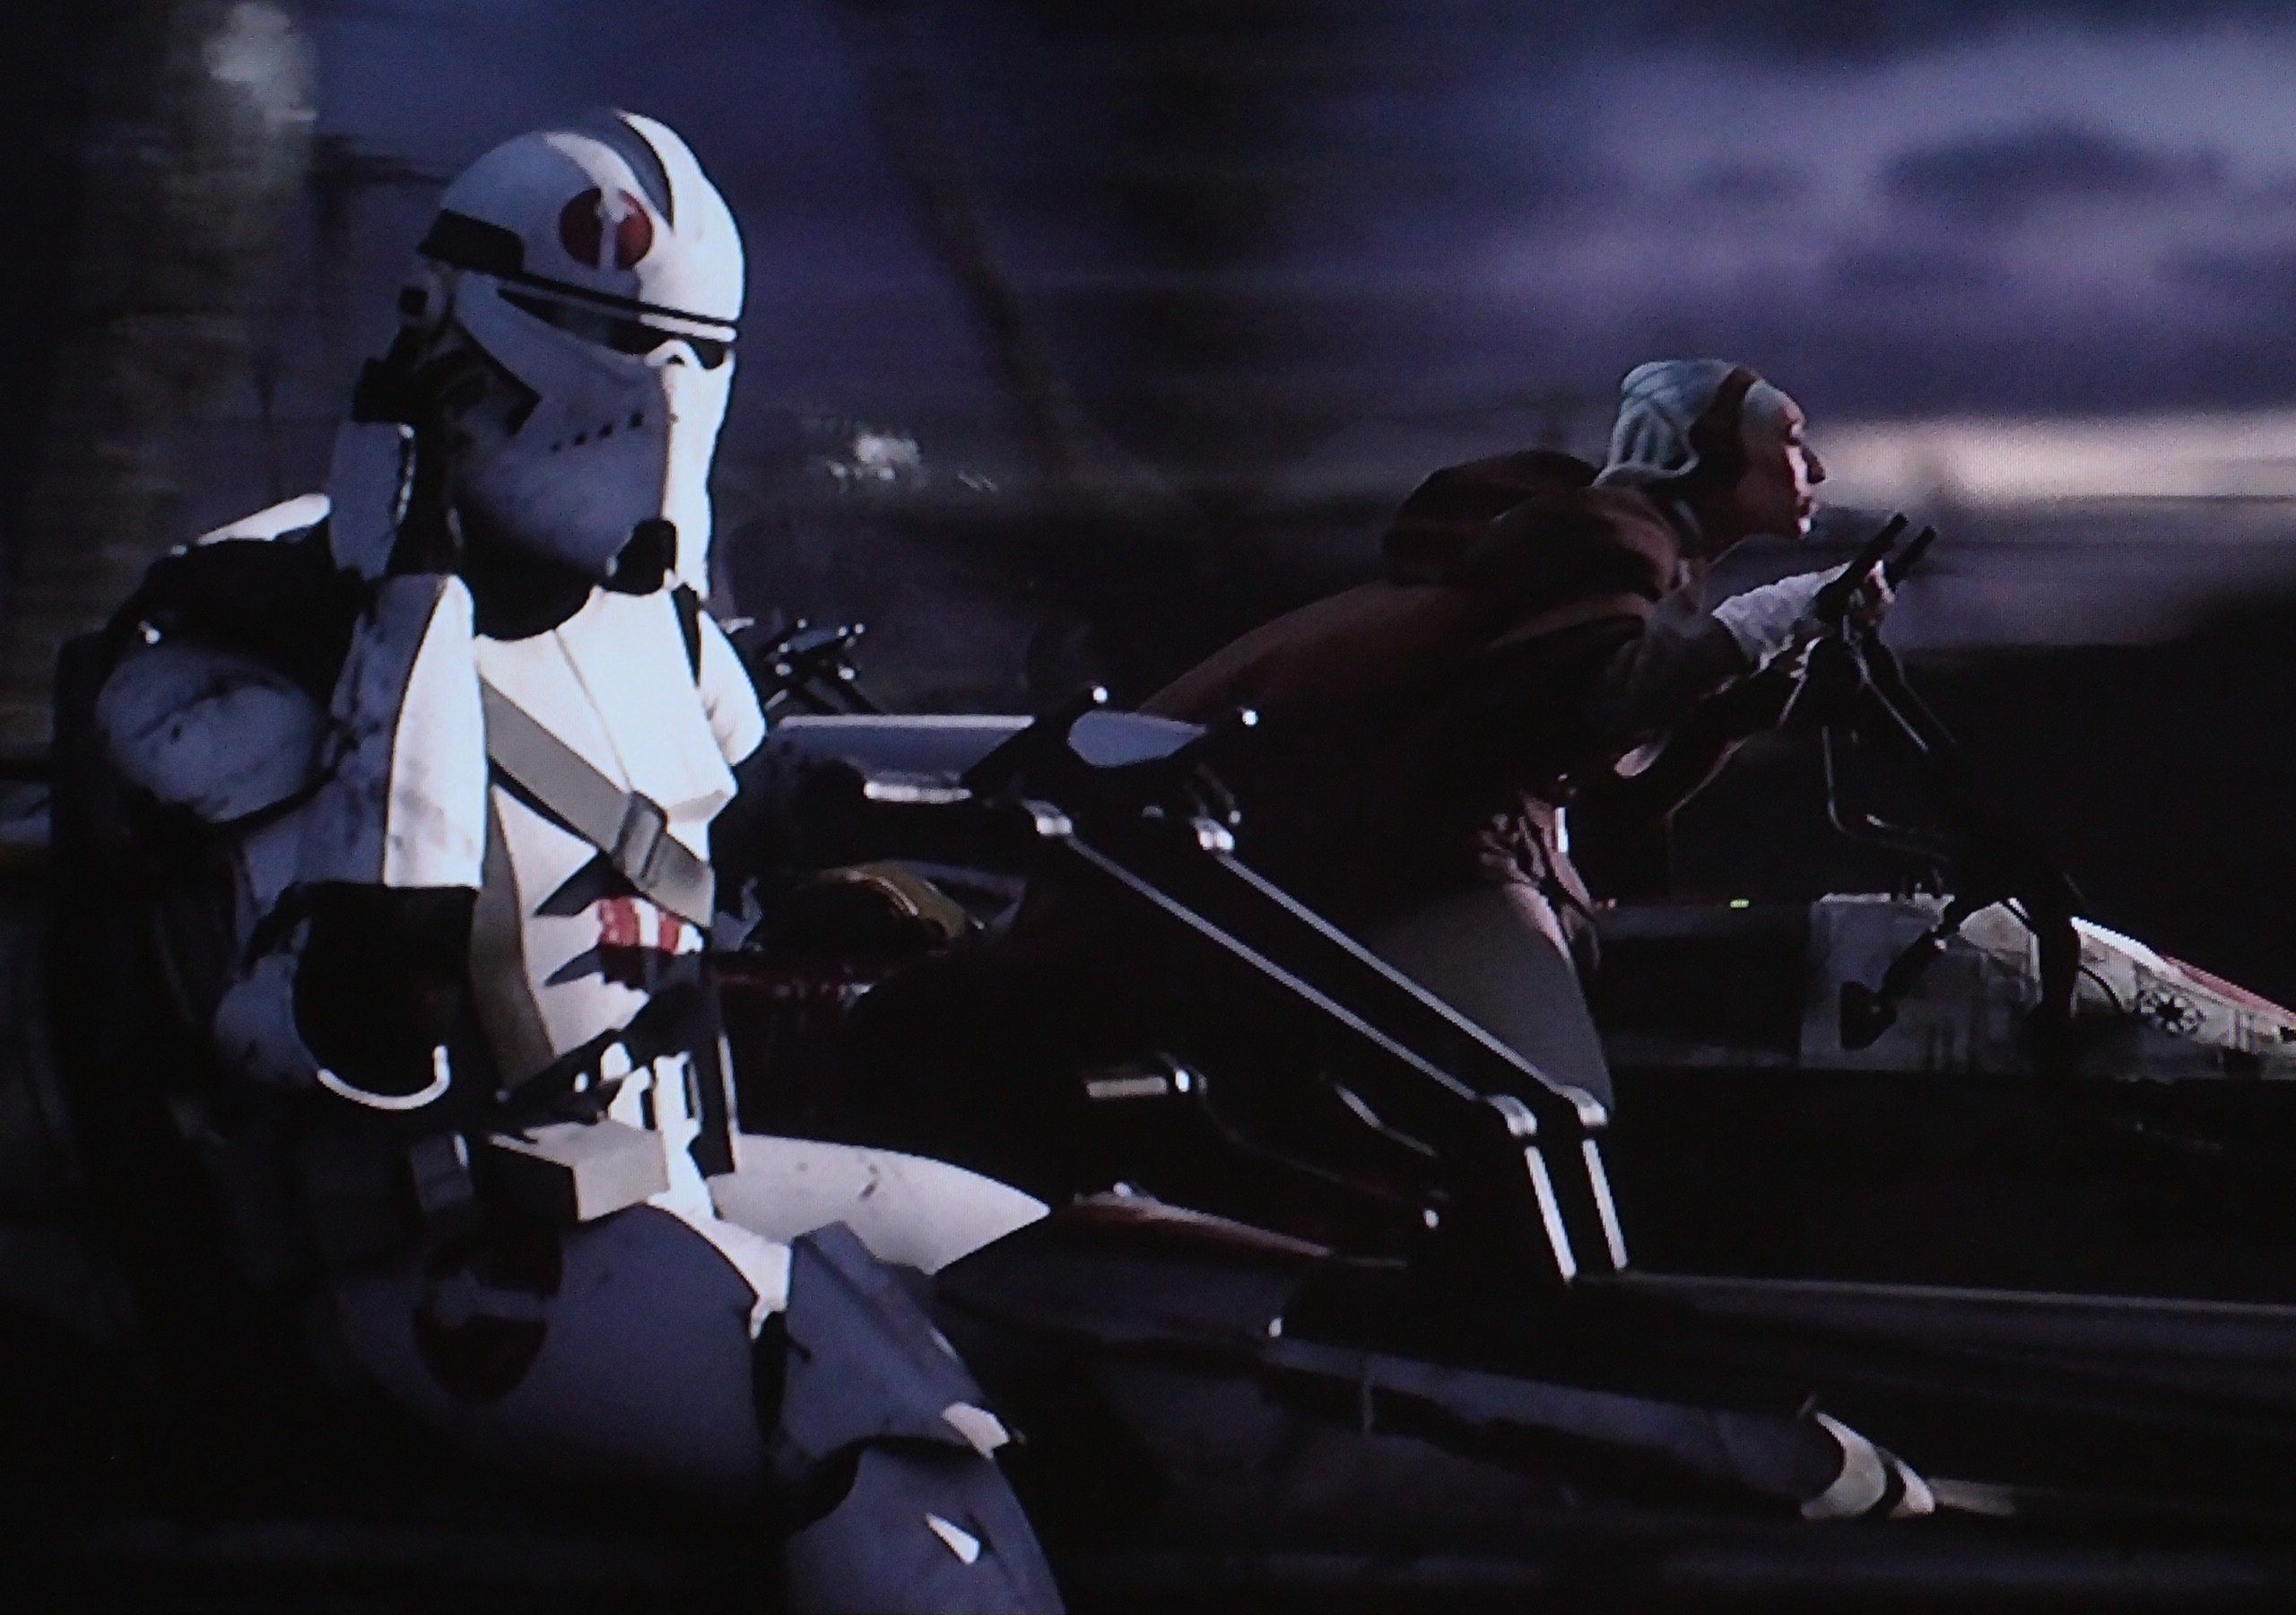 501st Clone Trooper Wallpaper Image In Collection